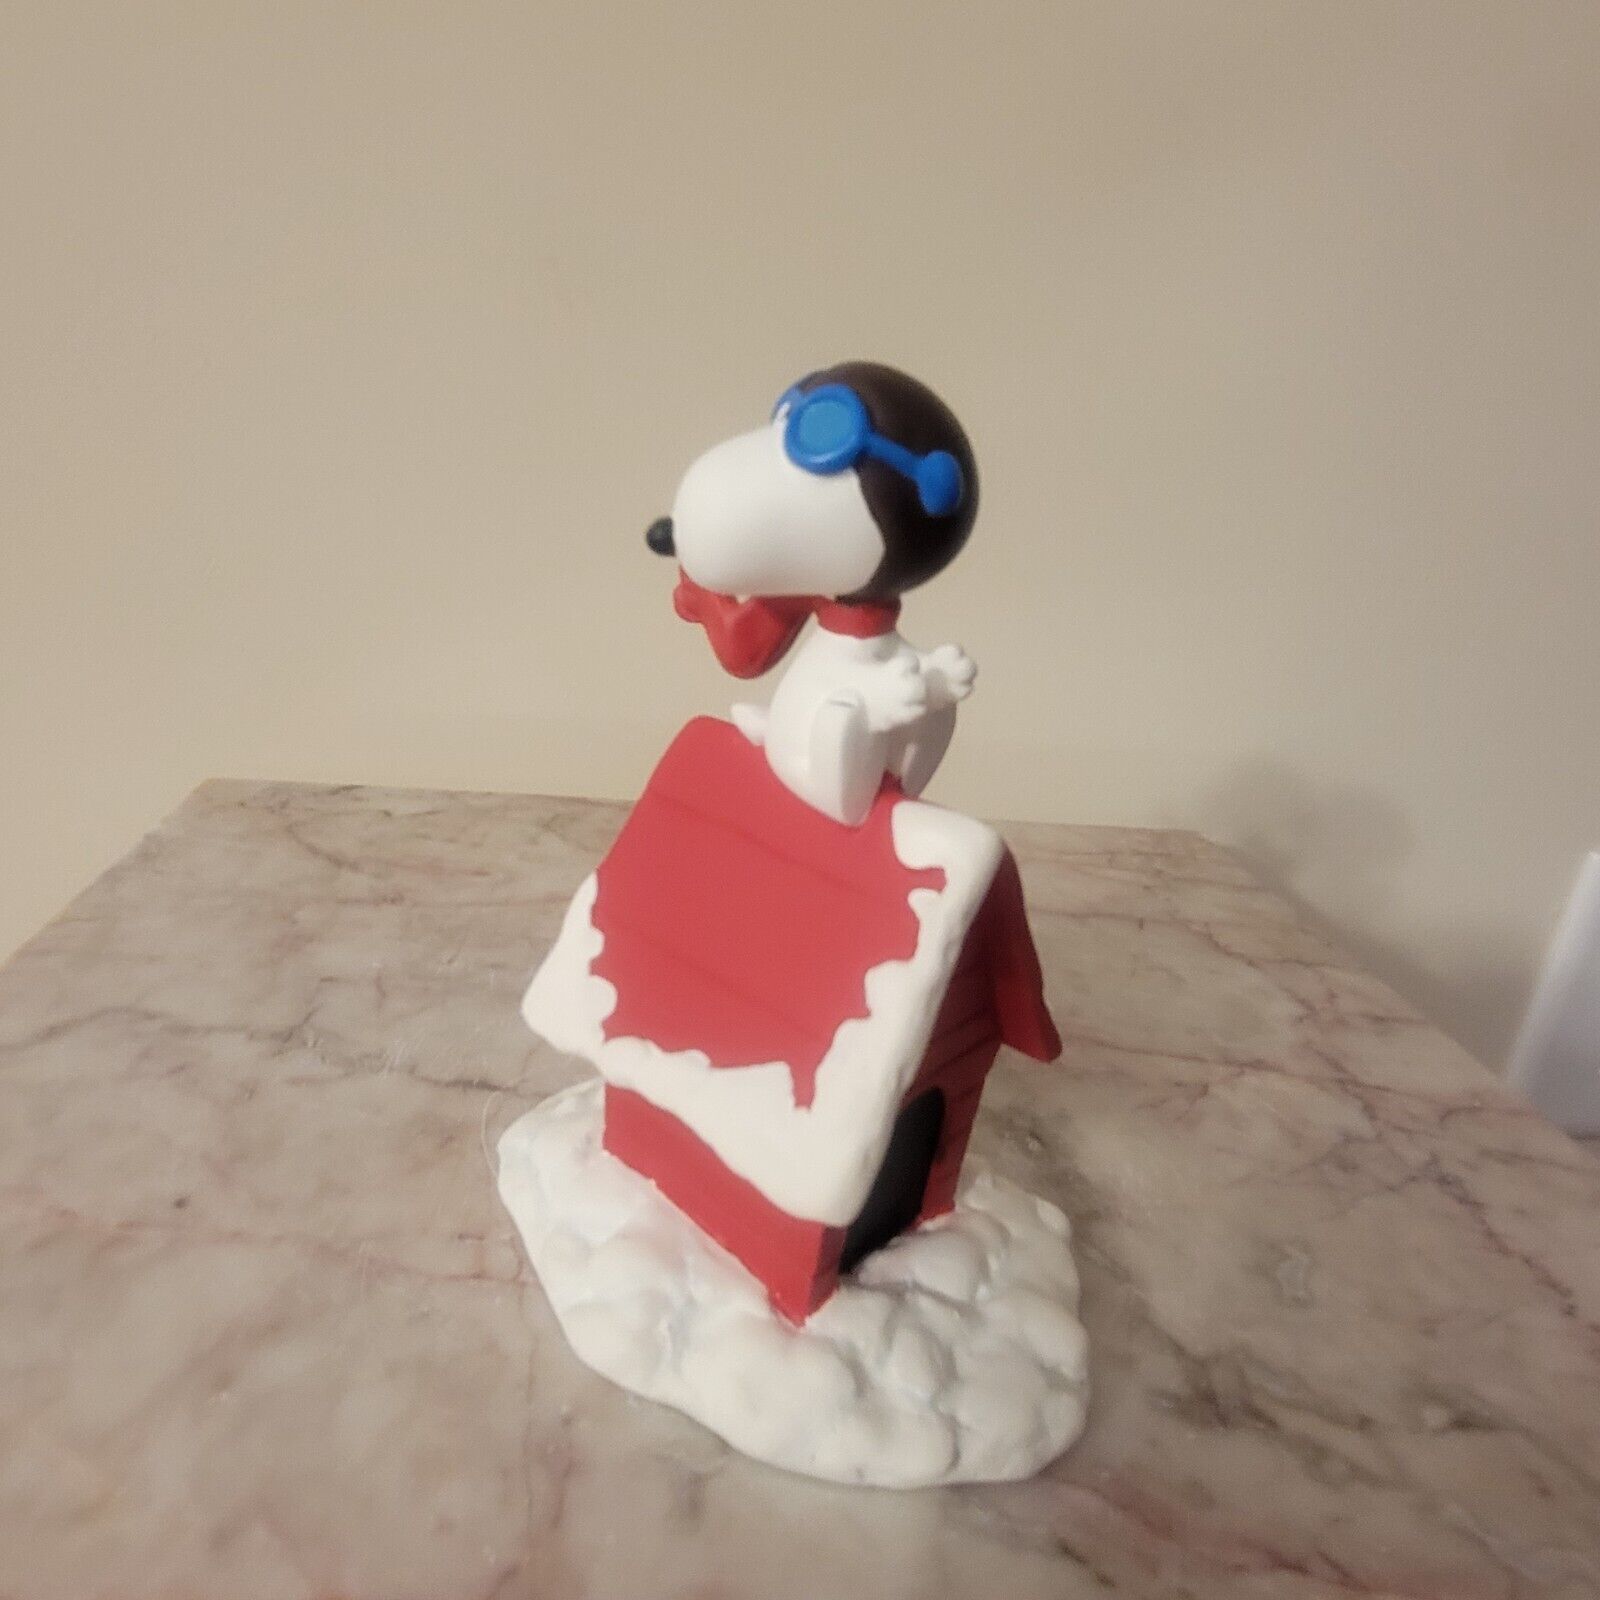 PEANUTS SNOOPY THE FLYING ACE  WORLD SHOWCASE  FIGURINE 1997